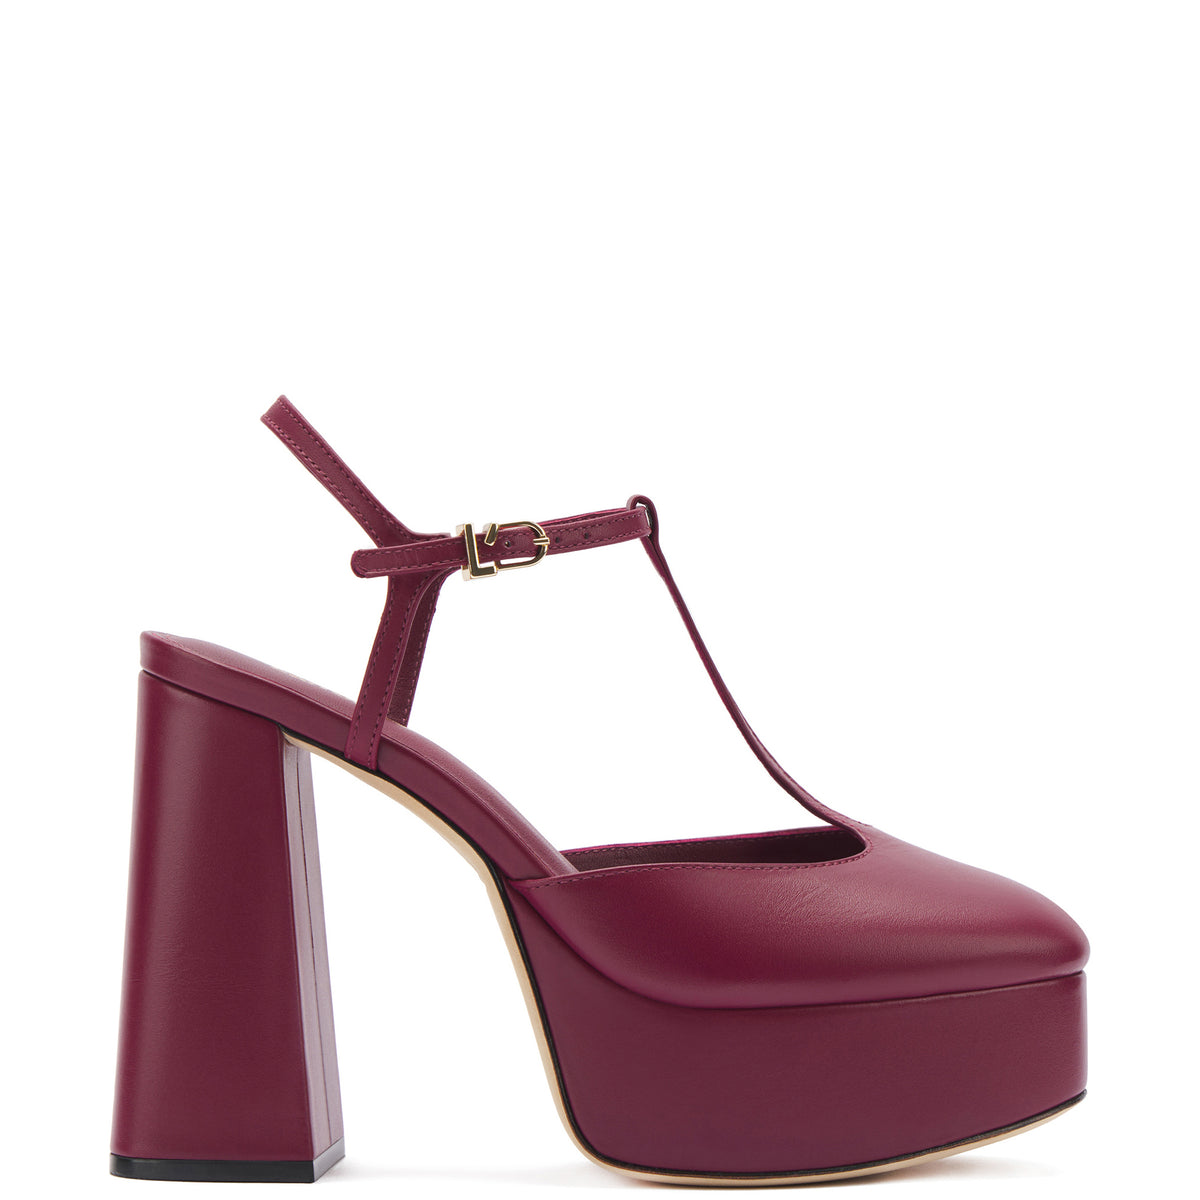 Pixie Pump In Wine Leather